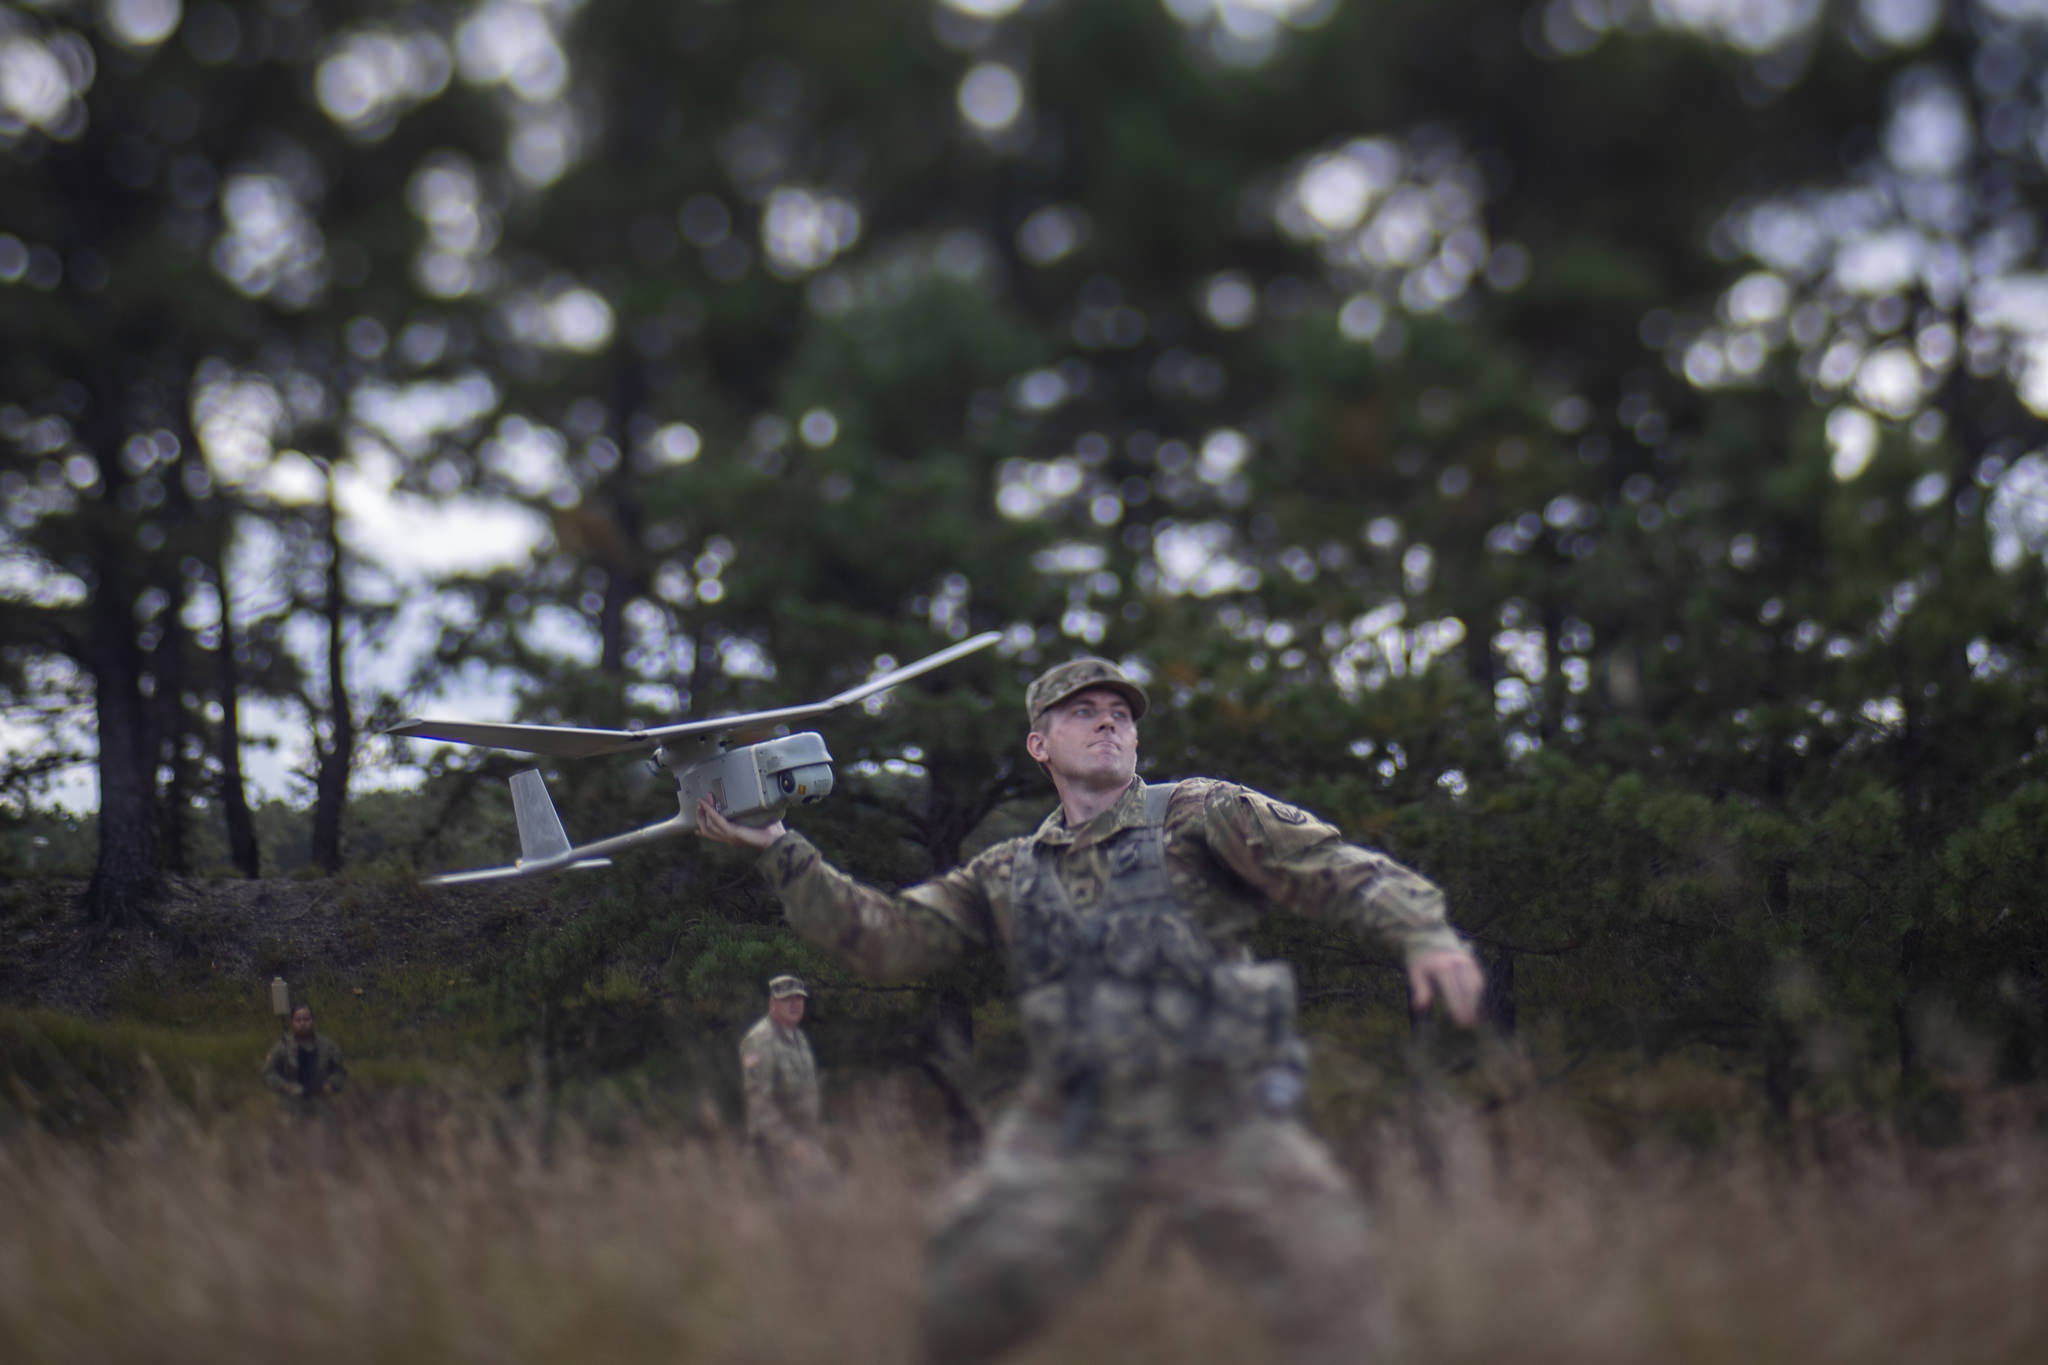 A U.S. Army Soldier prepares a RQ-11 Raven B for flight during the field training portion of a Unmanned Aerial System operator’s course on Joint Base McGuire-Dix-Lakehurst, N.J., Oct. 10, 2018. The course was held by the New Jersey Army National Guard’s 254th Regional Training Institute, which is based out of Sea Girt, N.J. (U.S. Air National Guard photo by Master Sgt. Matt Hecht)